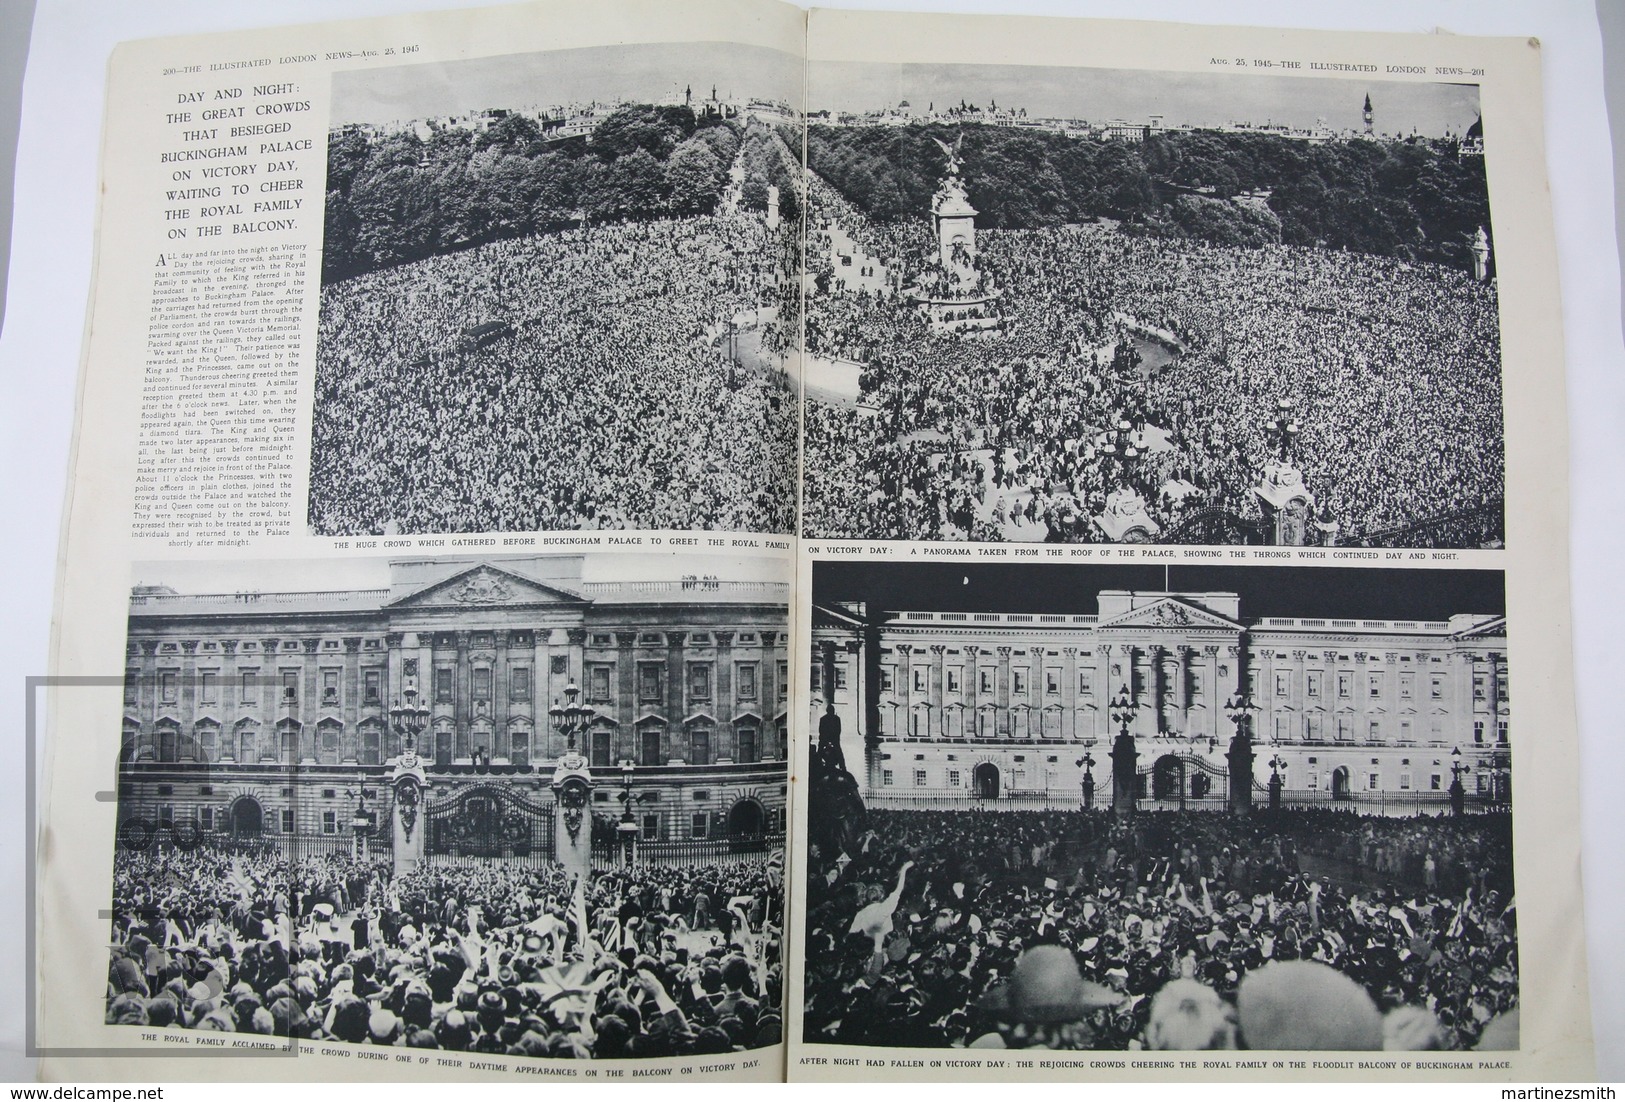 WWII The Illustrated London News, August 25, 1945 - Their Majesties And The Princesses Of England - Geschiedenis